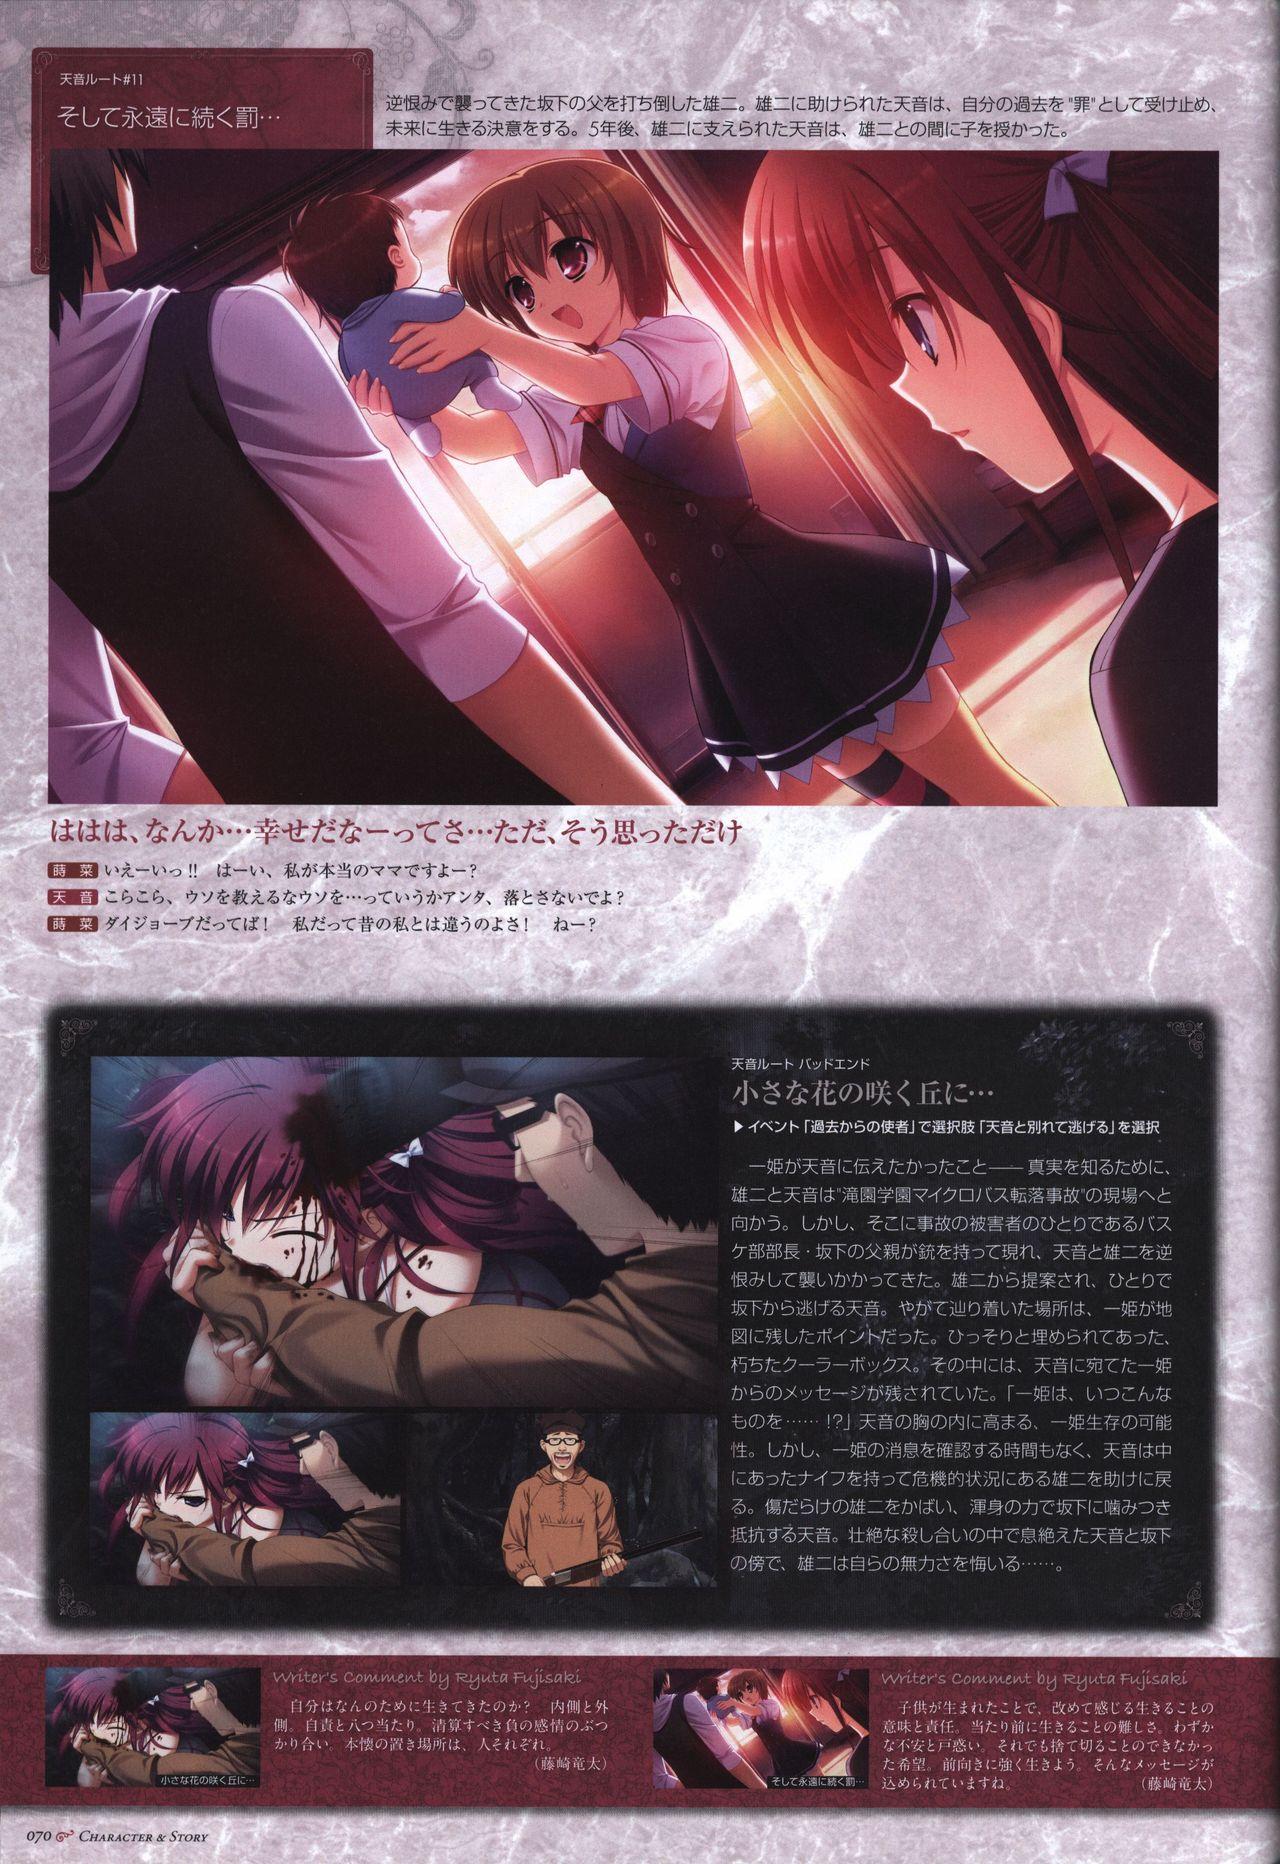 The Fruit of Grisaia Visual FanBook 70